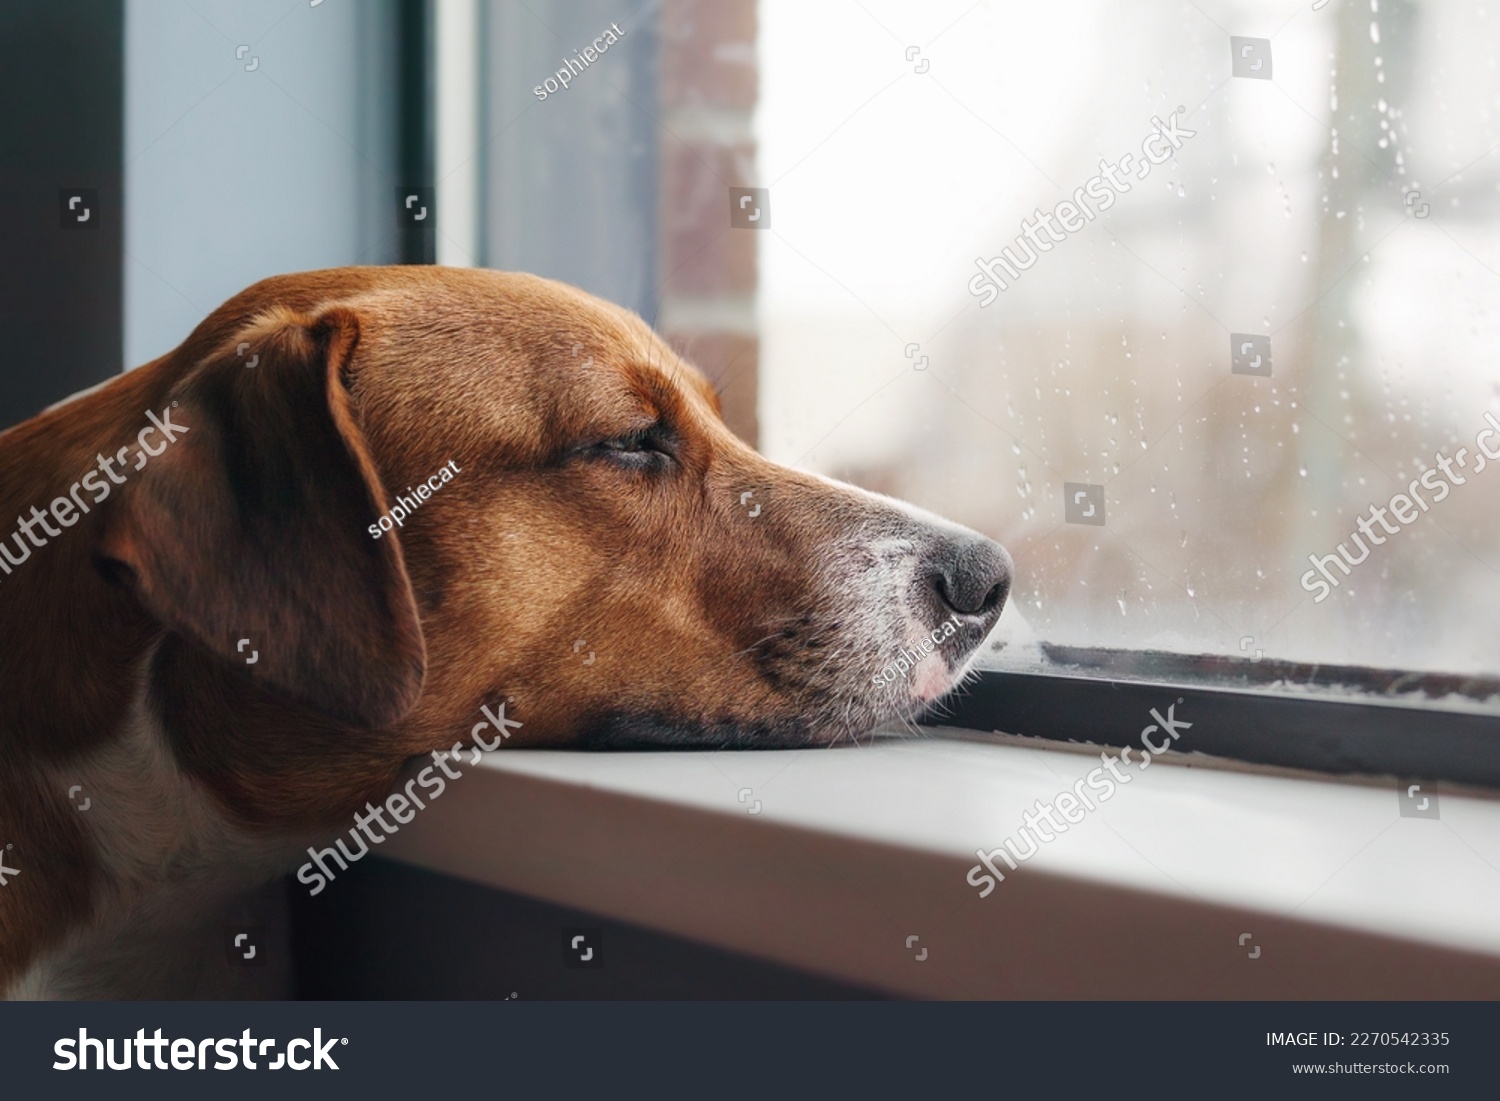 Bored dog with head on window sill while looking at the rain outside. Side view of brown puppy dog resting or waiting with elevated head position. 1 year old female Harrier mix dog. Selective focus. #2270542335